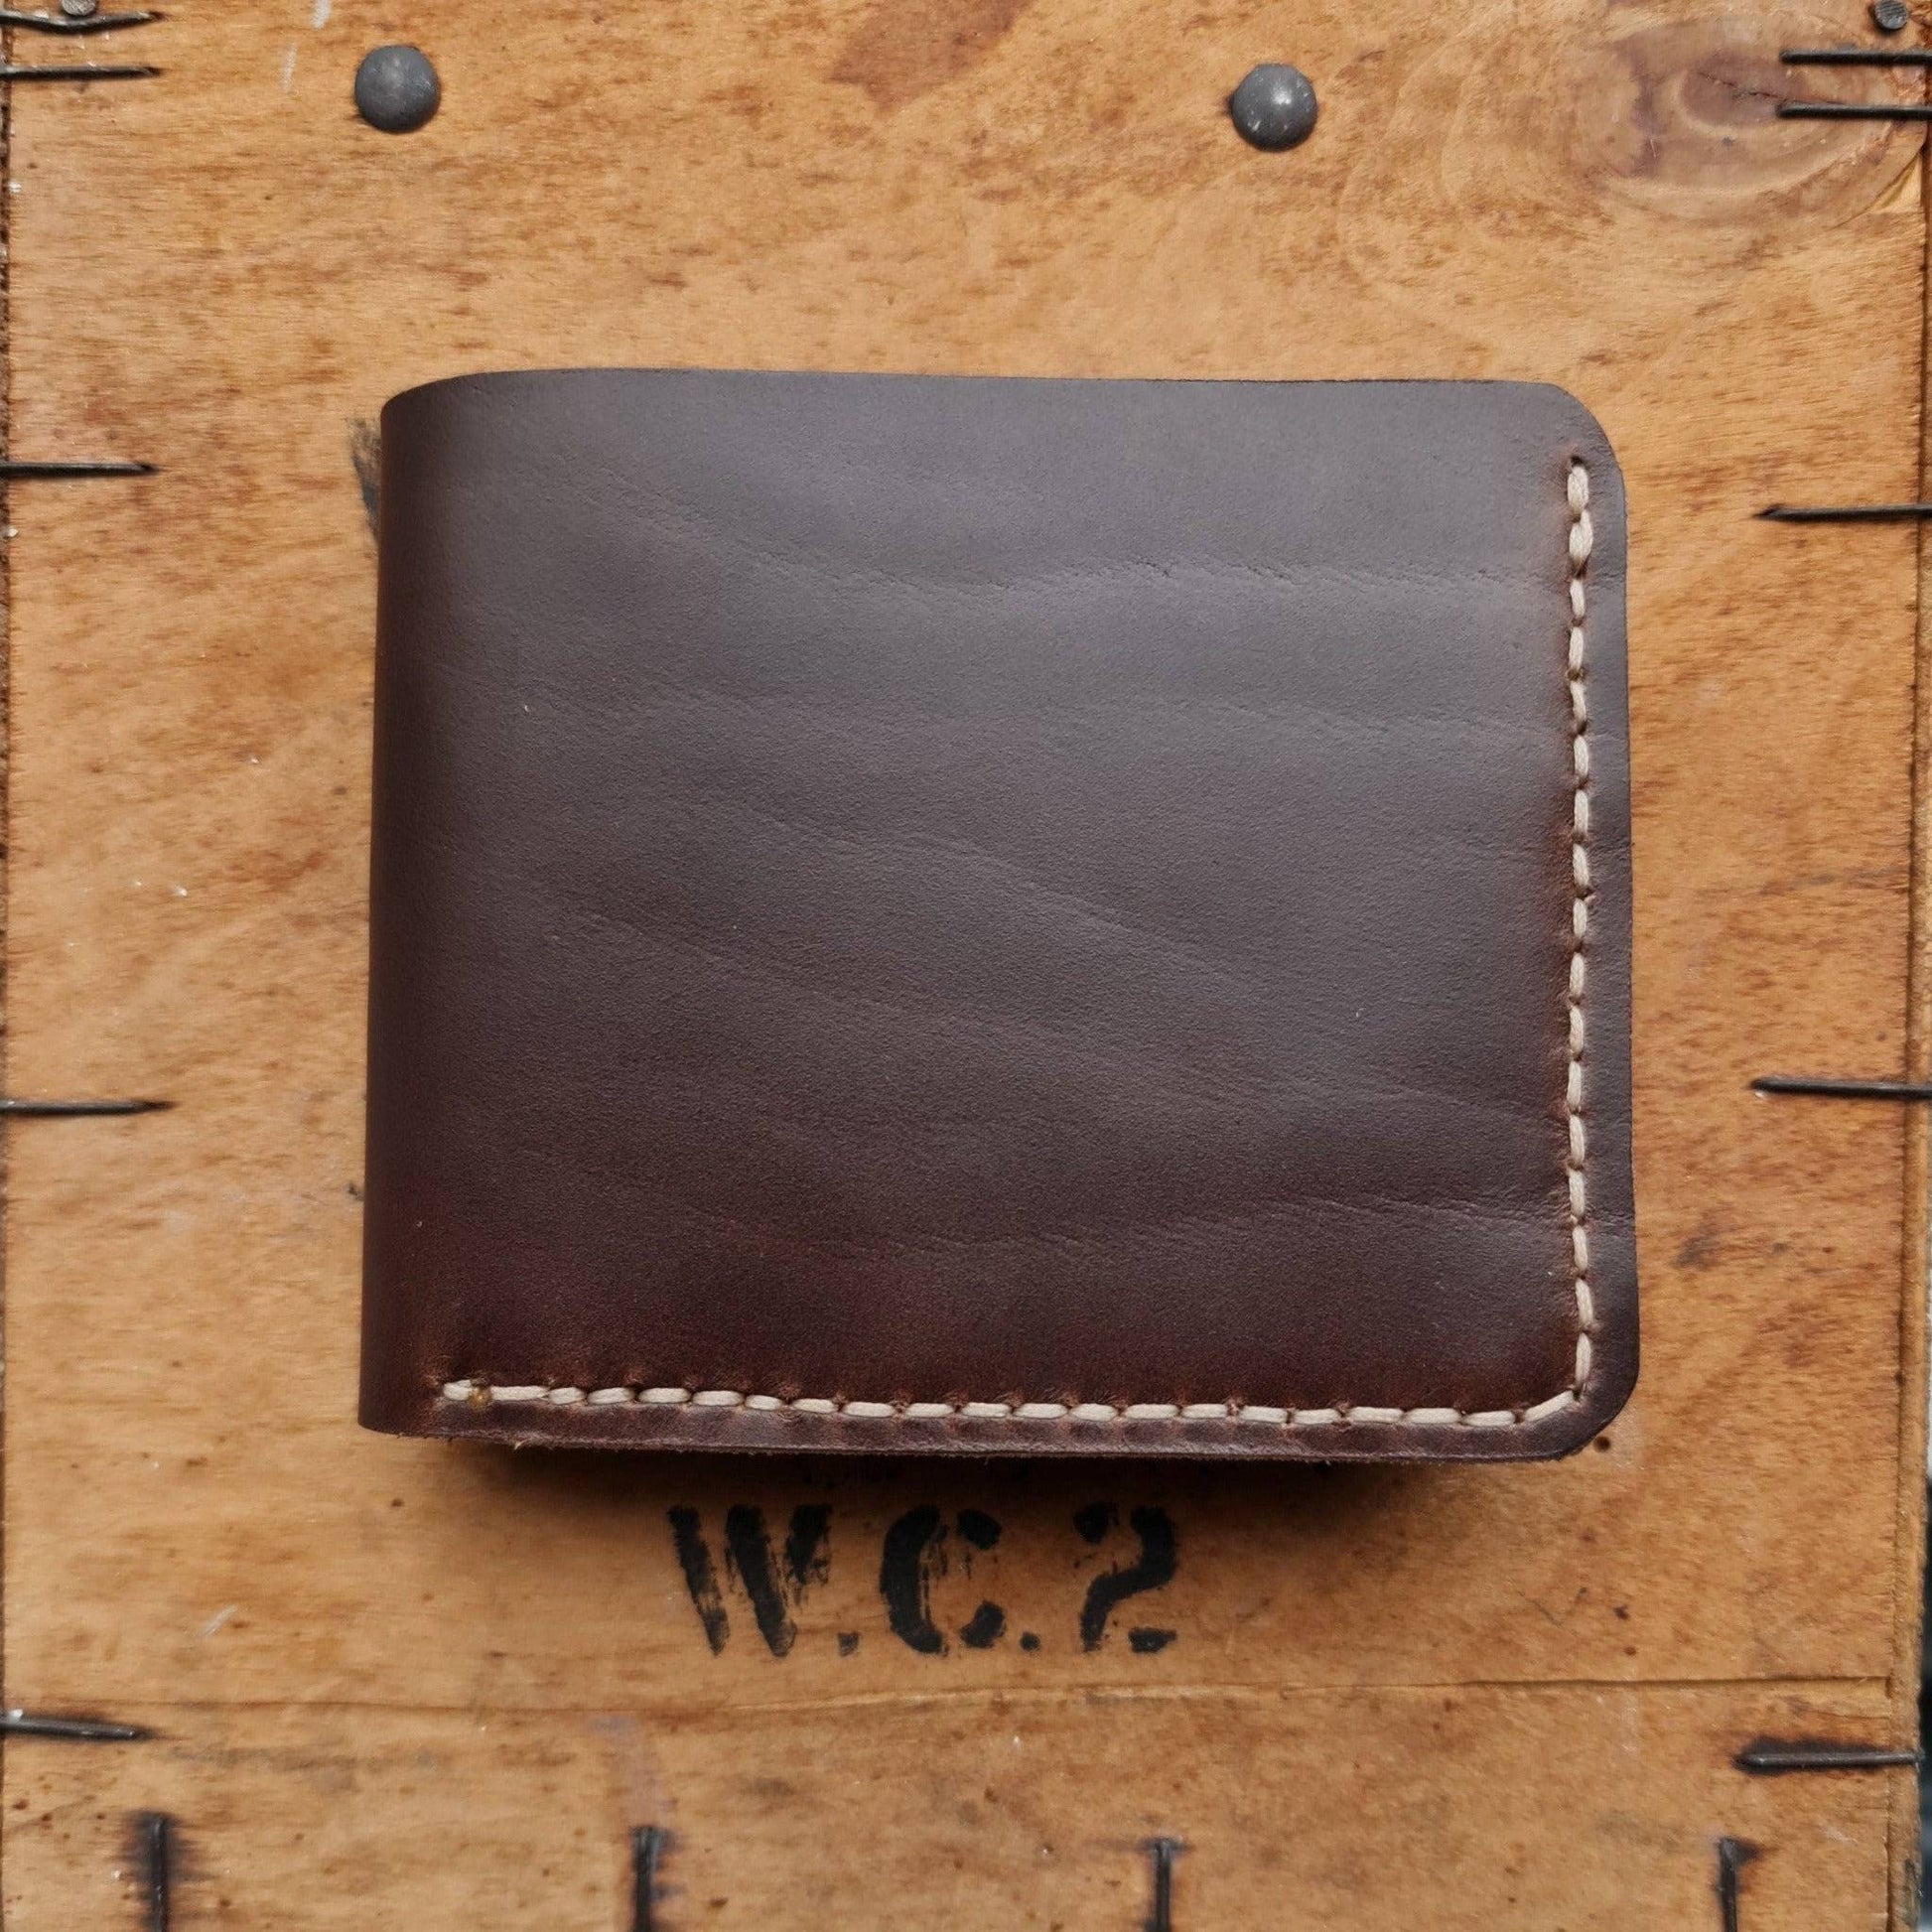 The Frontiersman men's leather wallet with cash and card holder in Brown full grain leather